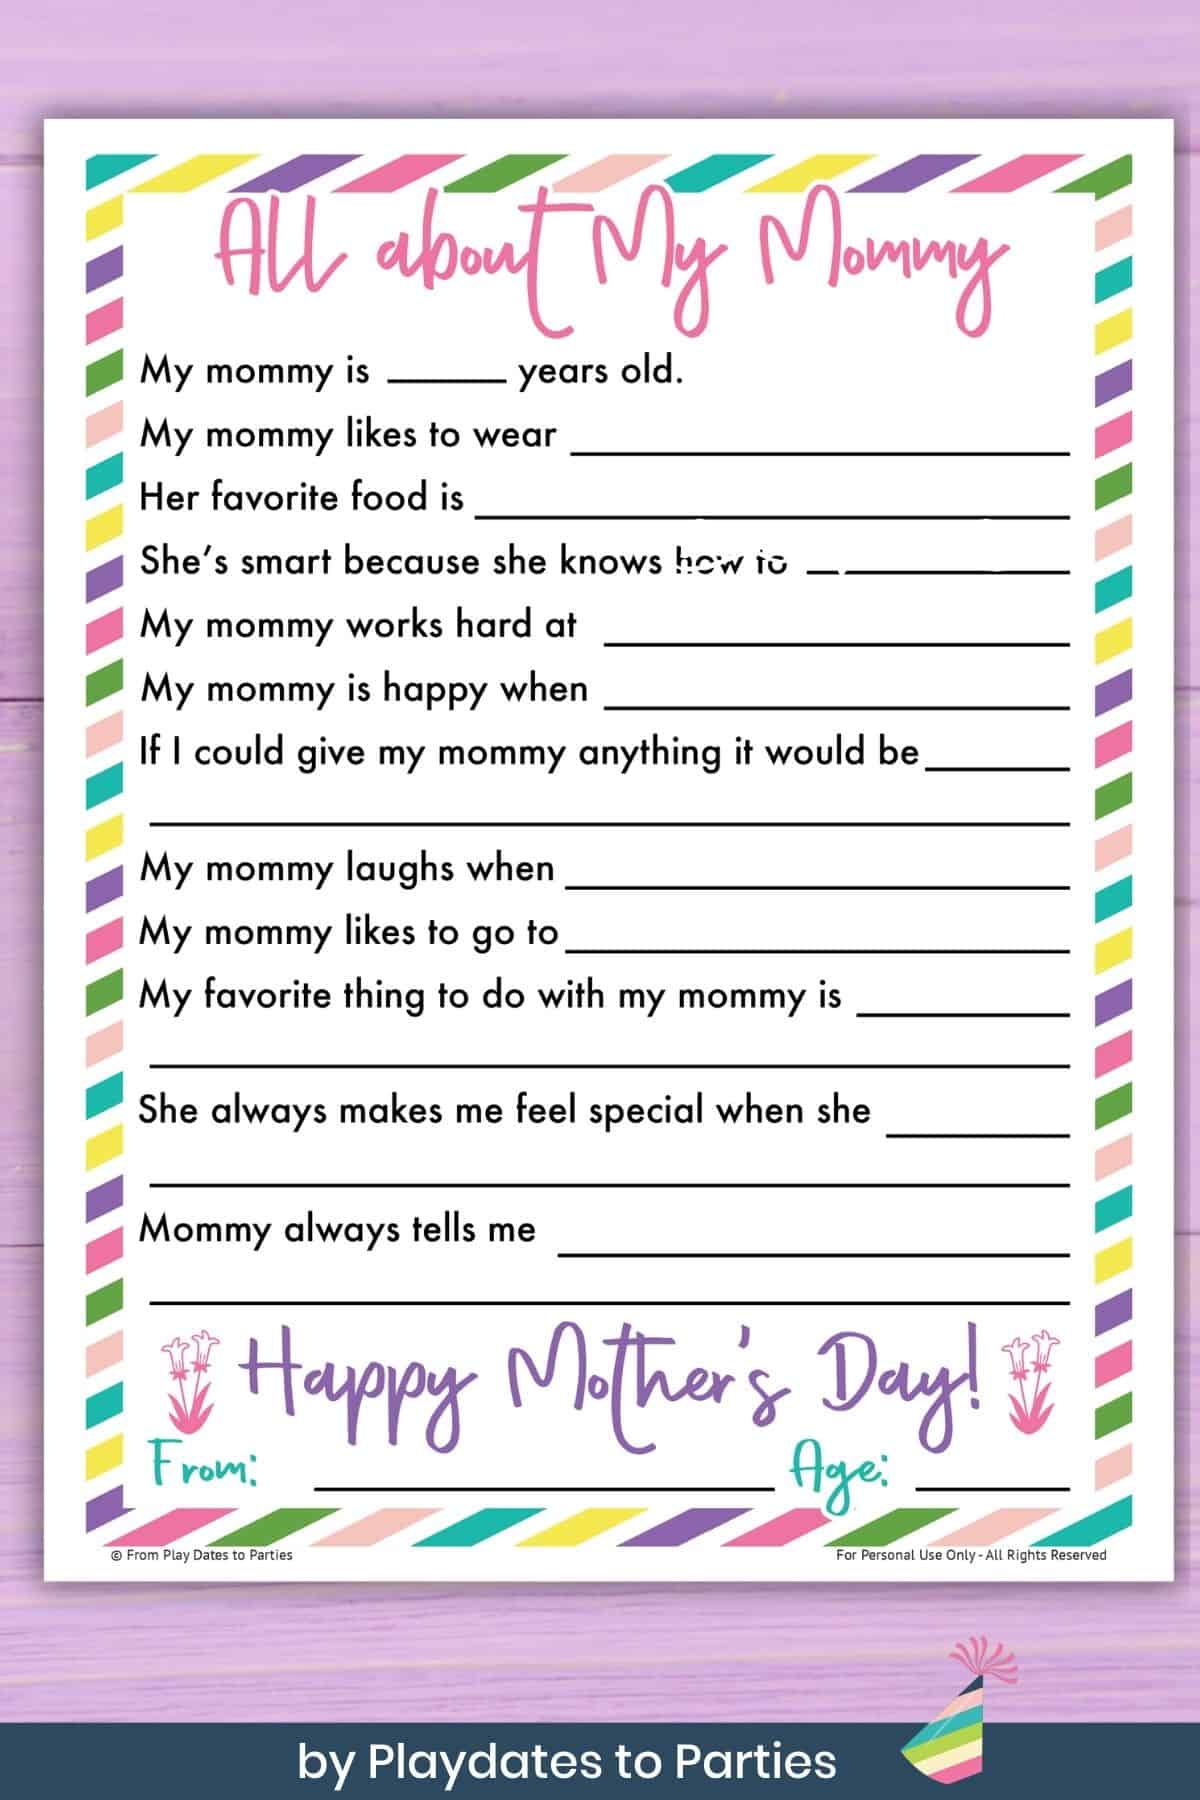 All about mommy questionnaire for kids.